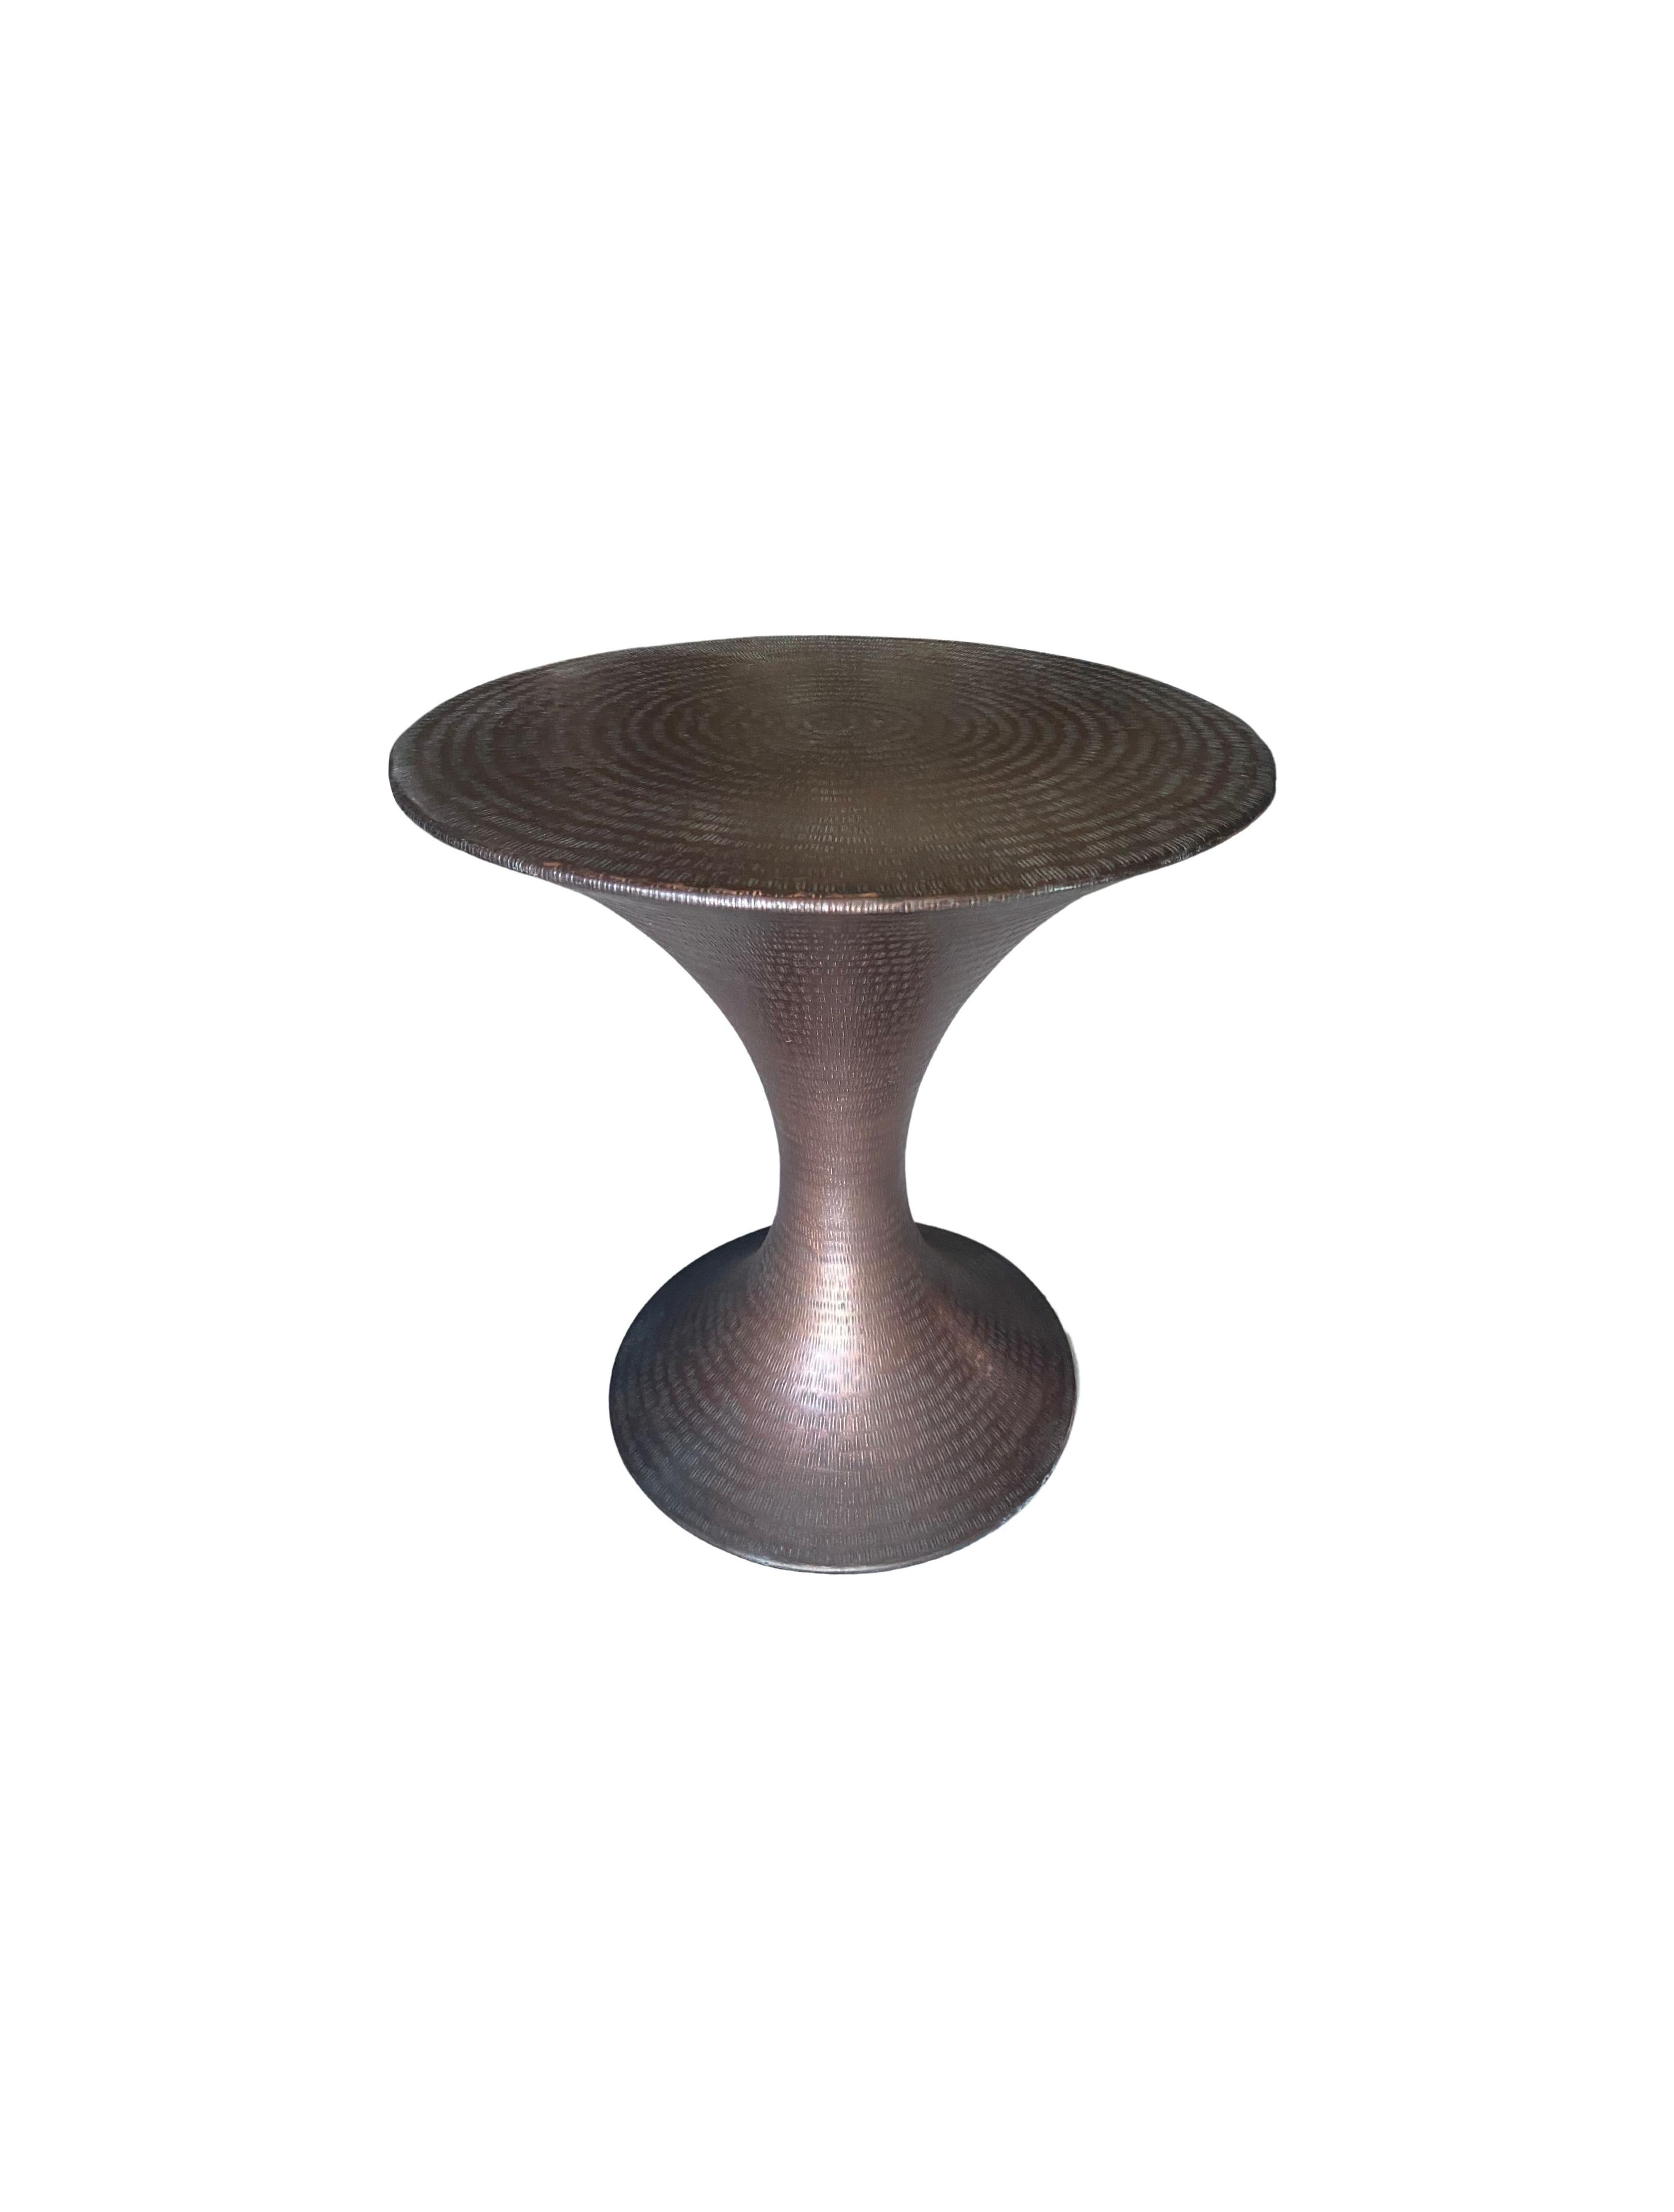 Hammered by hand this side table has a versatile aesthetic allowing it to mix easily with a wide range of spaces. The table is crafted from brass and features this wonderful detailing on all sides.